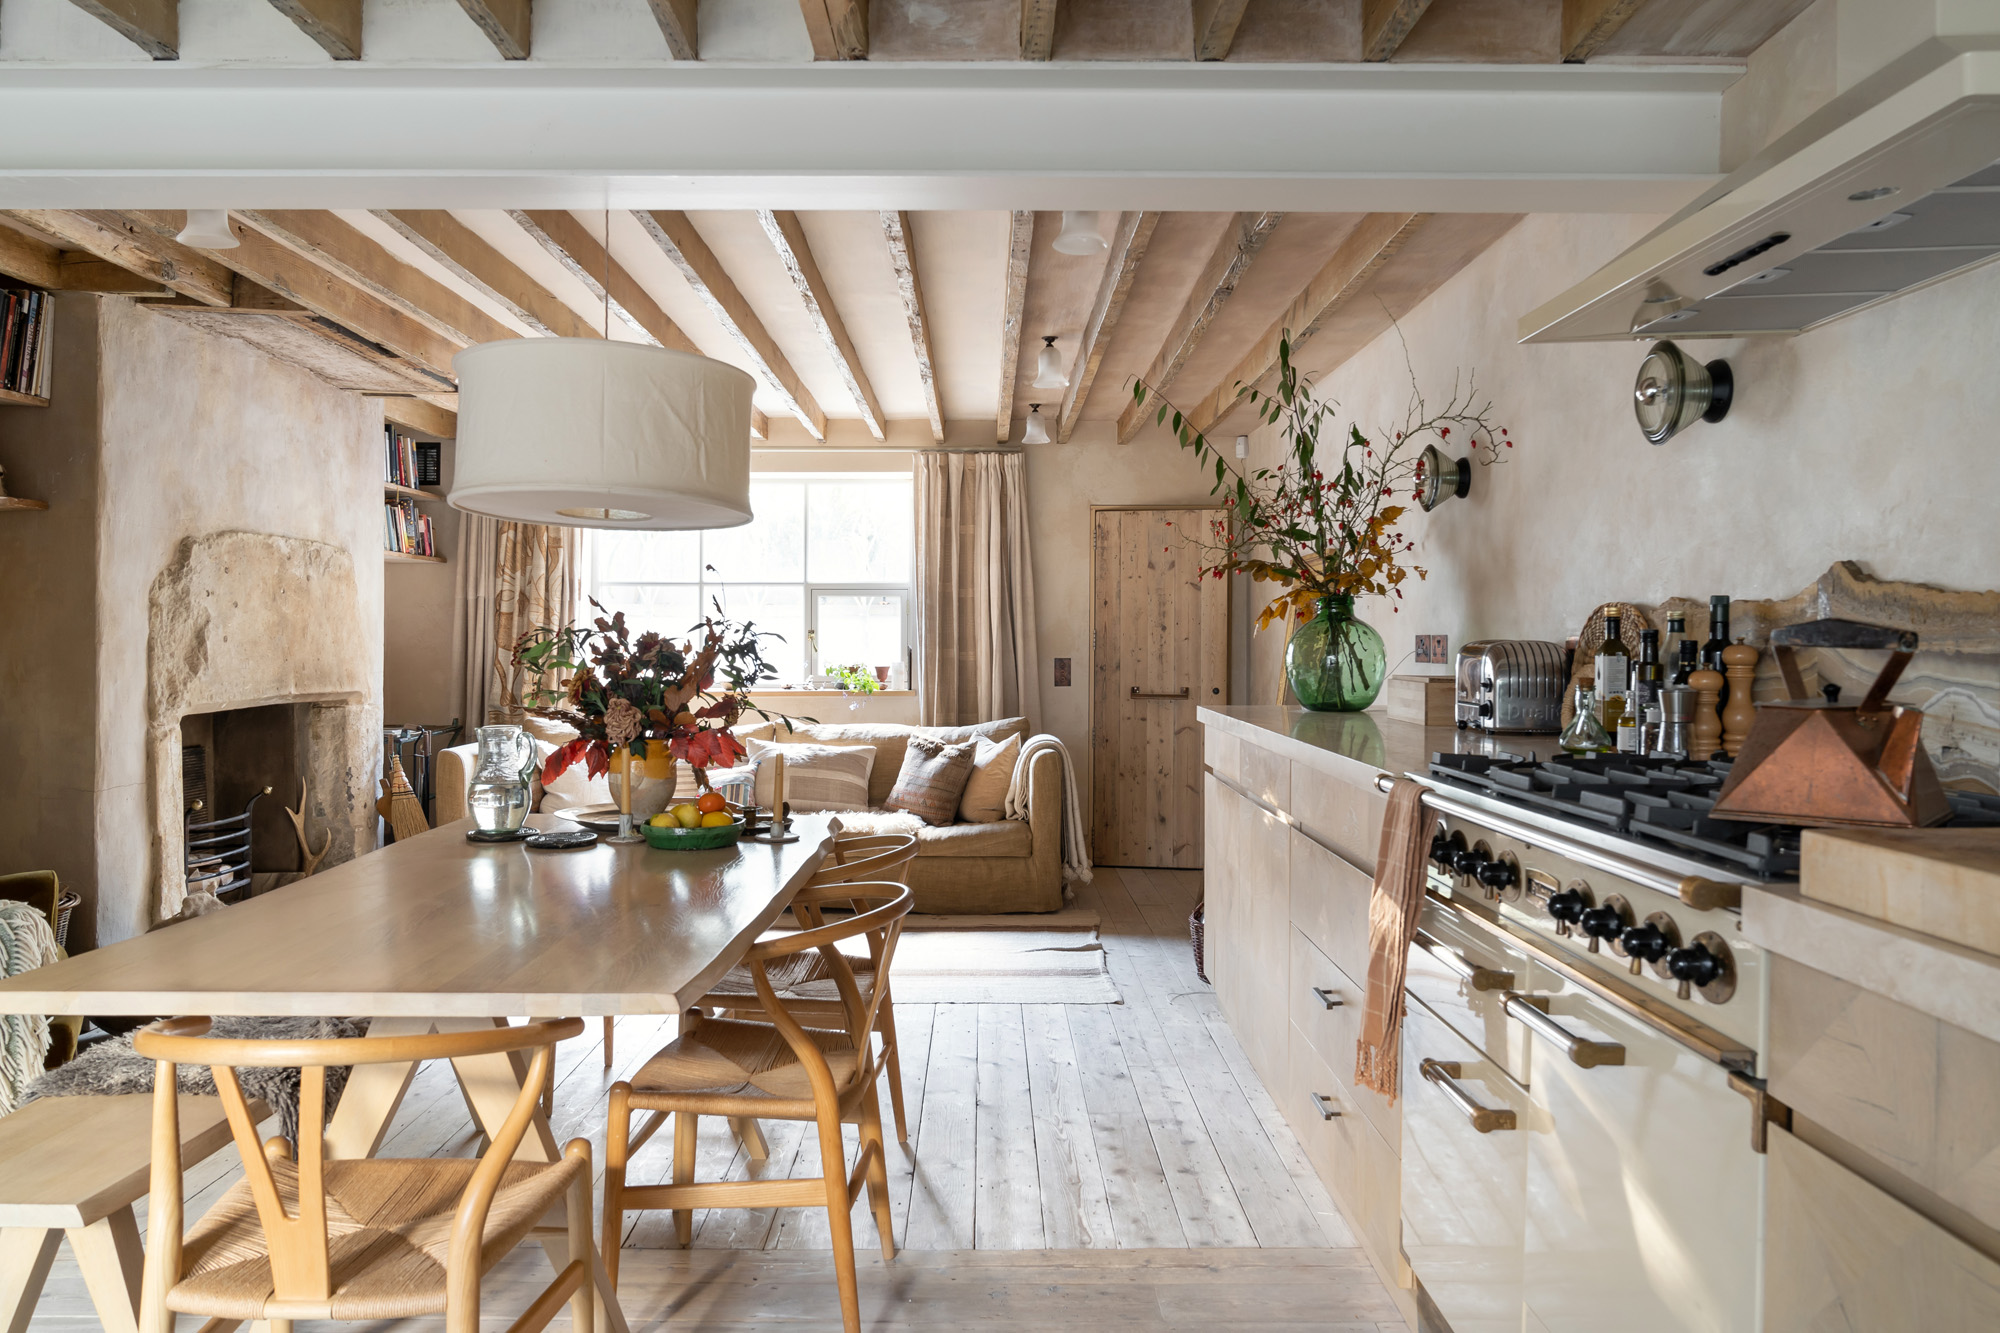 For Sale: Kensington Park Road Notting Hill W11 rustic interior design in kitchen and dining room